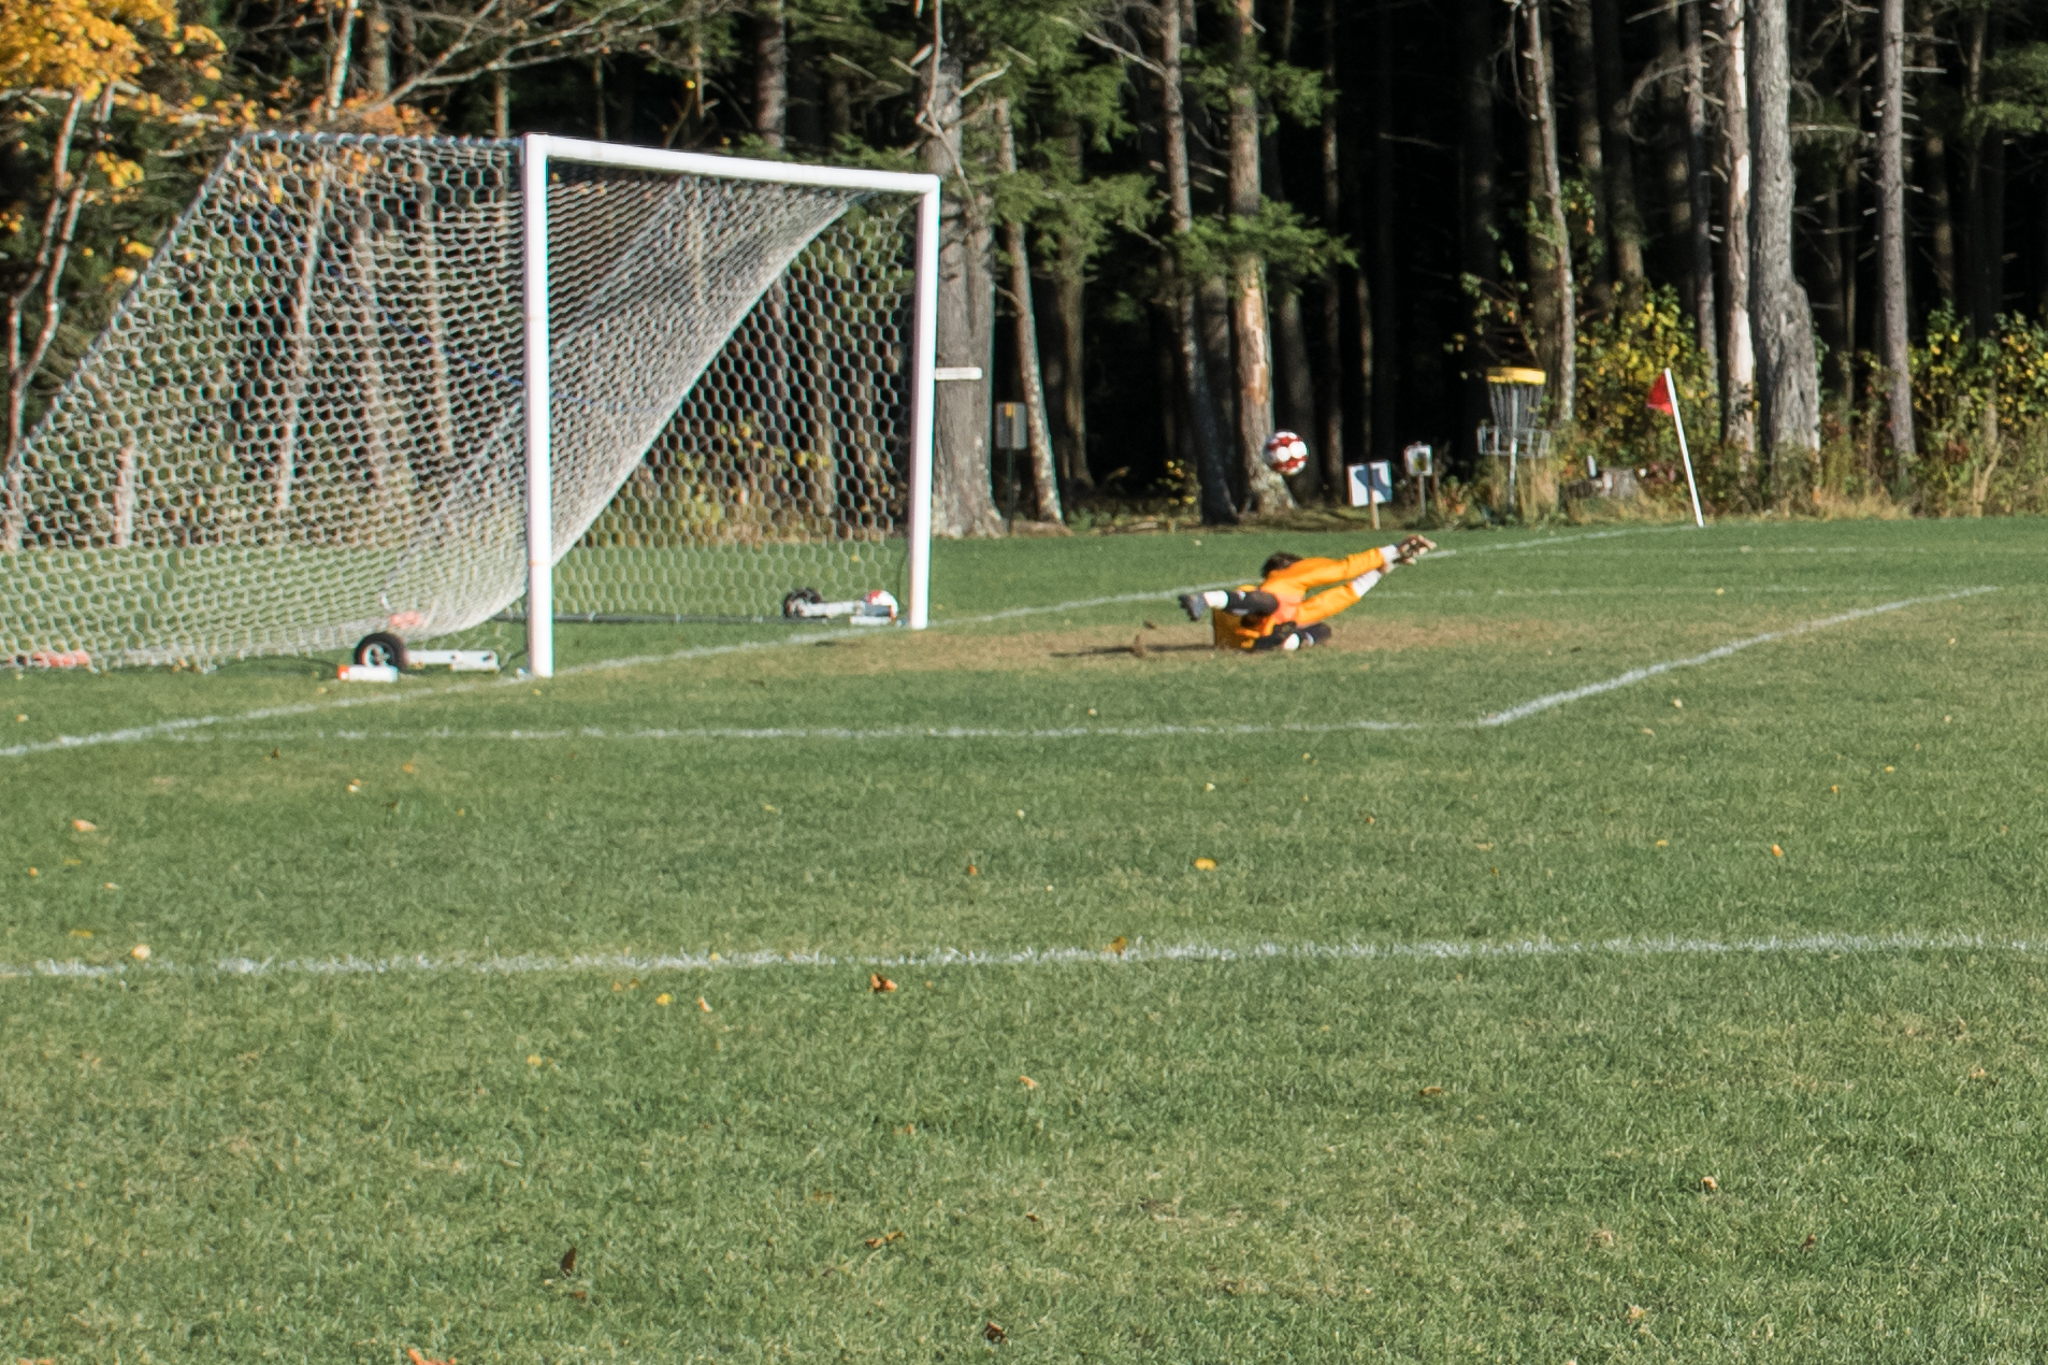 Harwood's Gavin Thomsen scored in the first minute of play against Montpelier Thursday. Photo: Jeff Knight